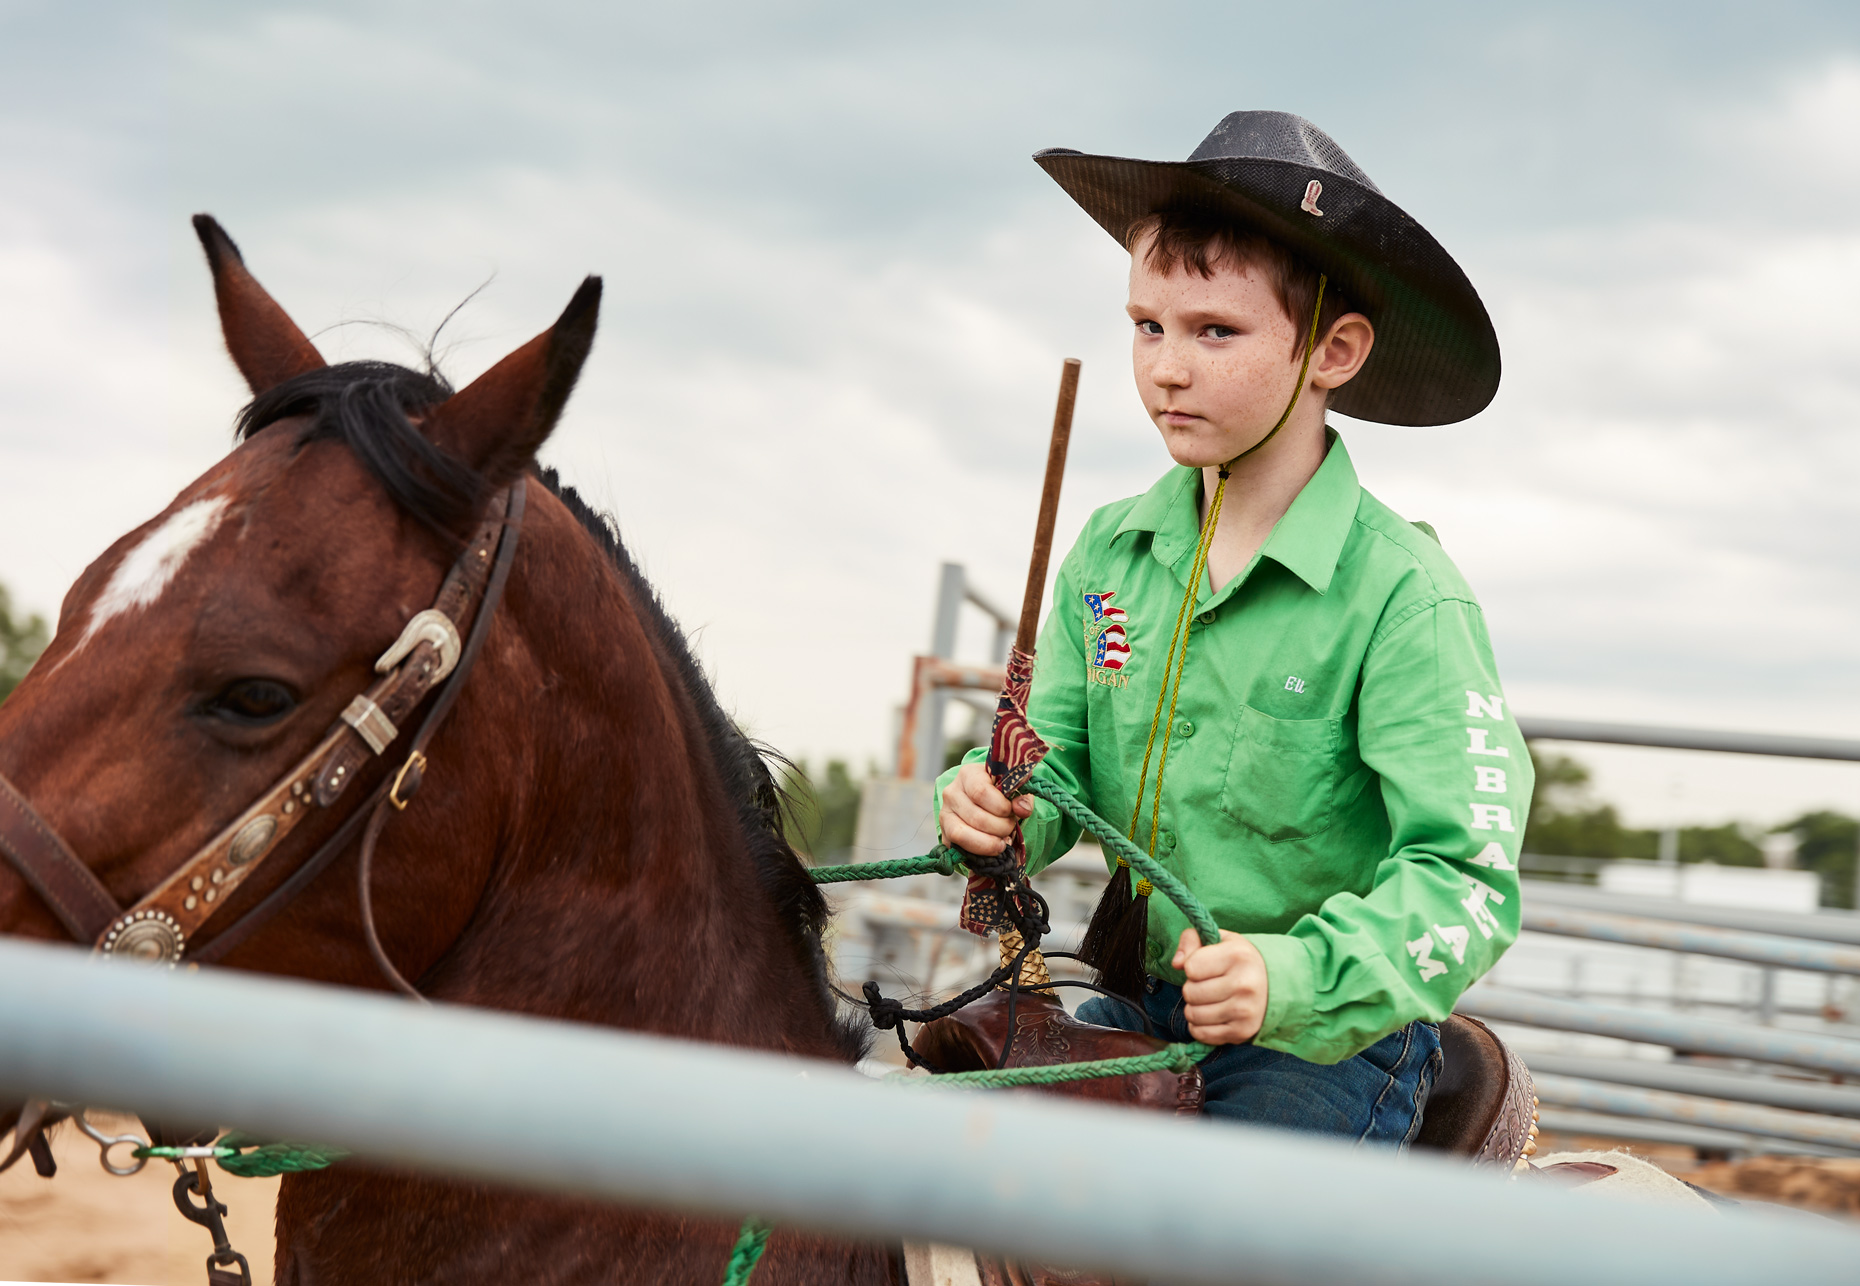 Boy glaring at rodeo competition | Childrens photography by Saverio Truglia